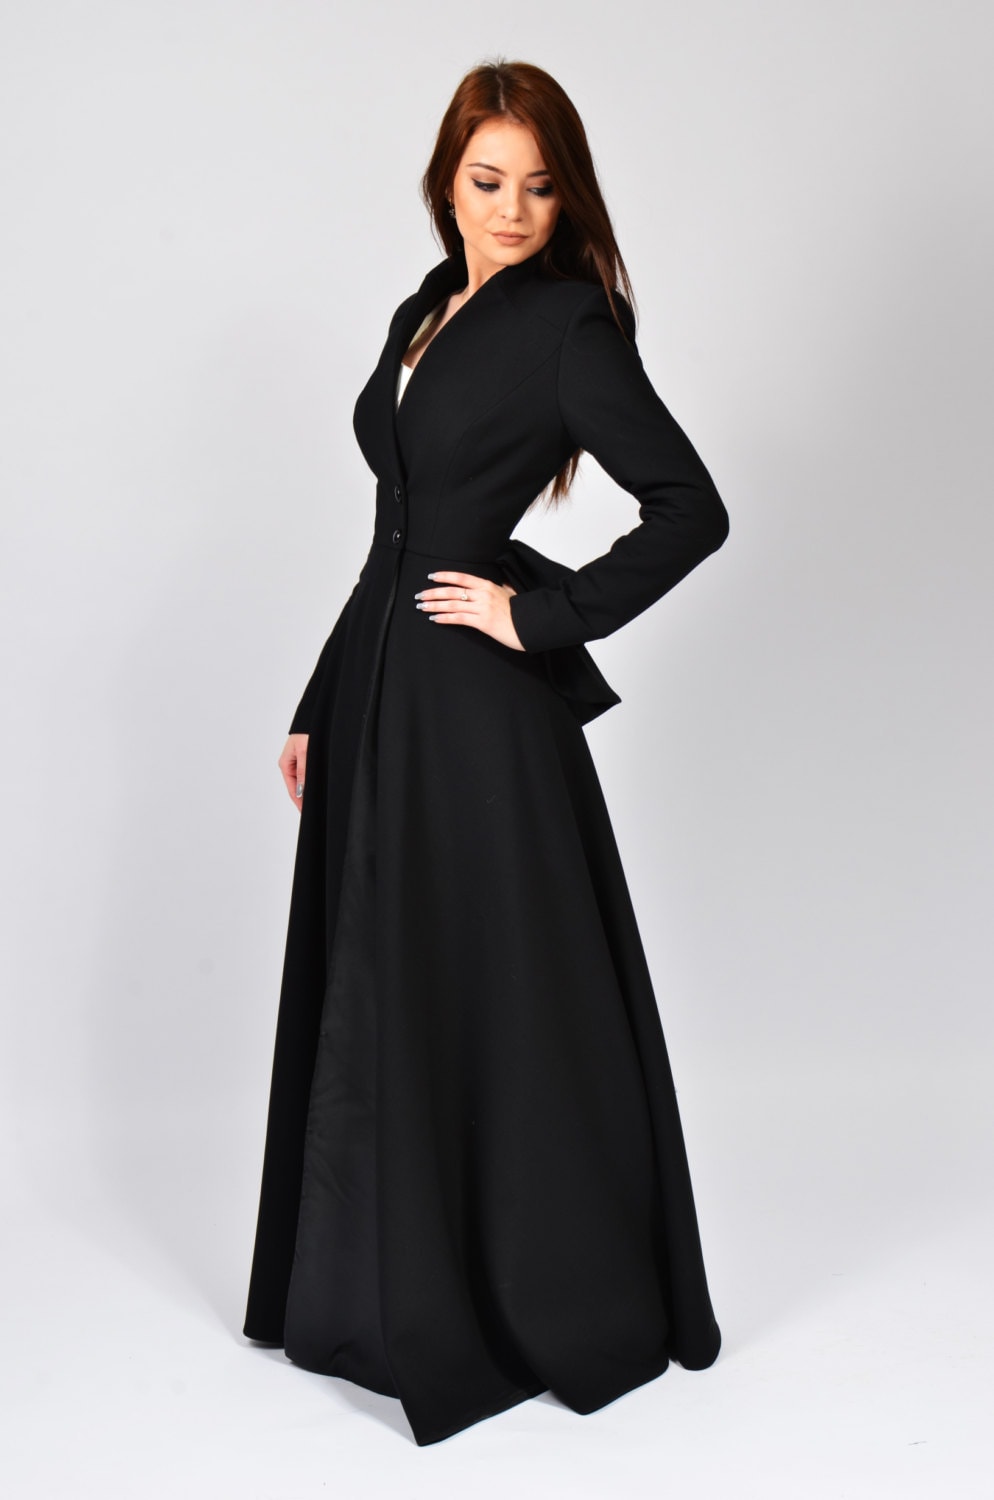 Jacket Style Gown | Long Jacket Dress For Wedding With Price